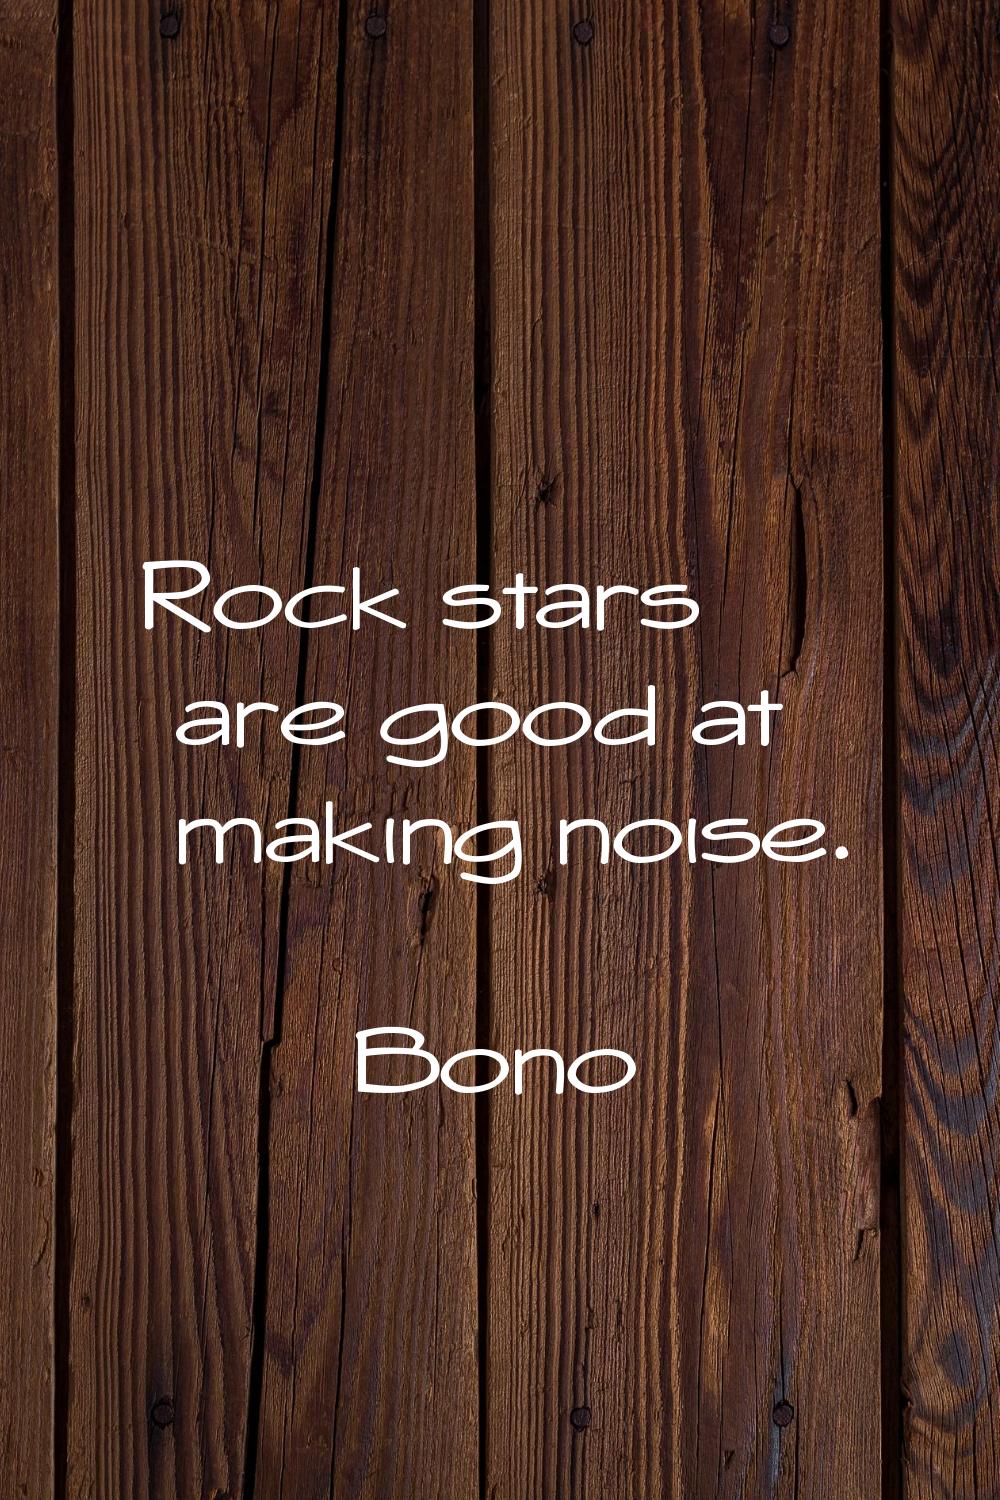 Rock stars are good at making noise.